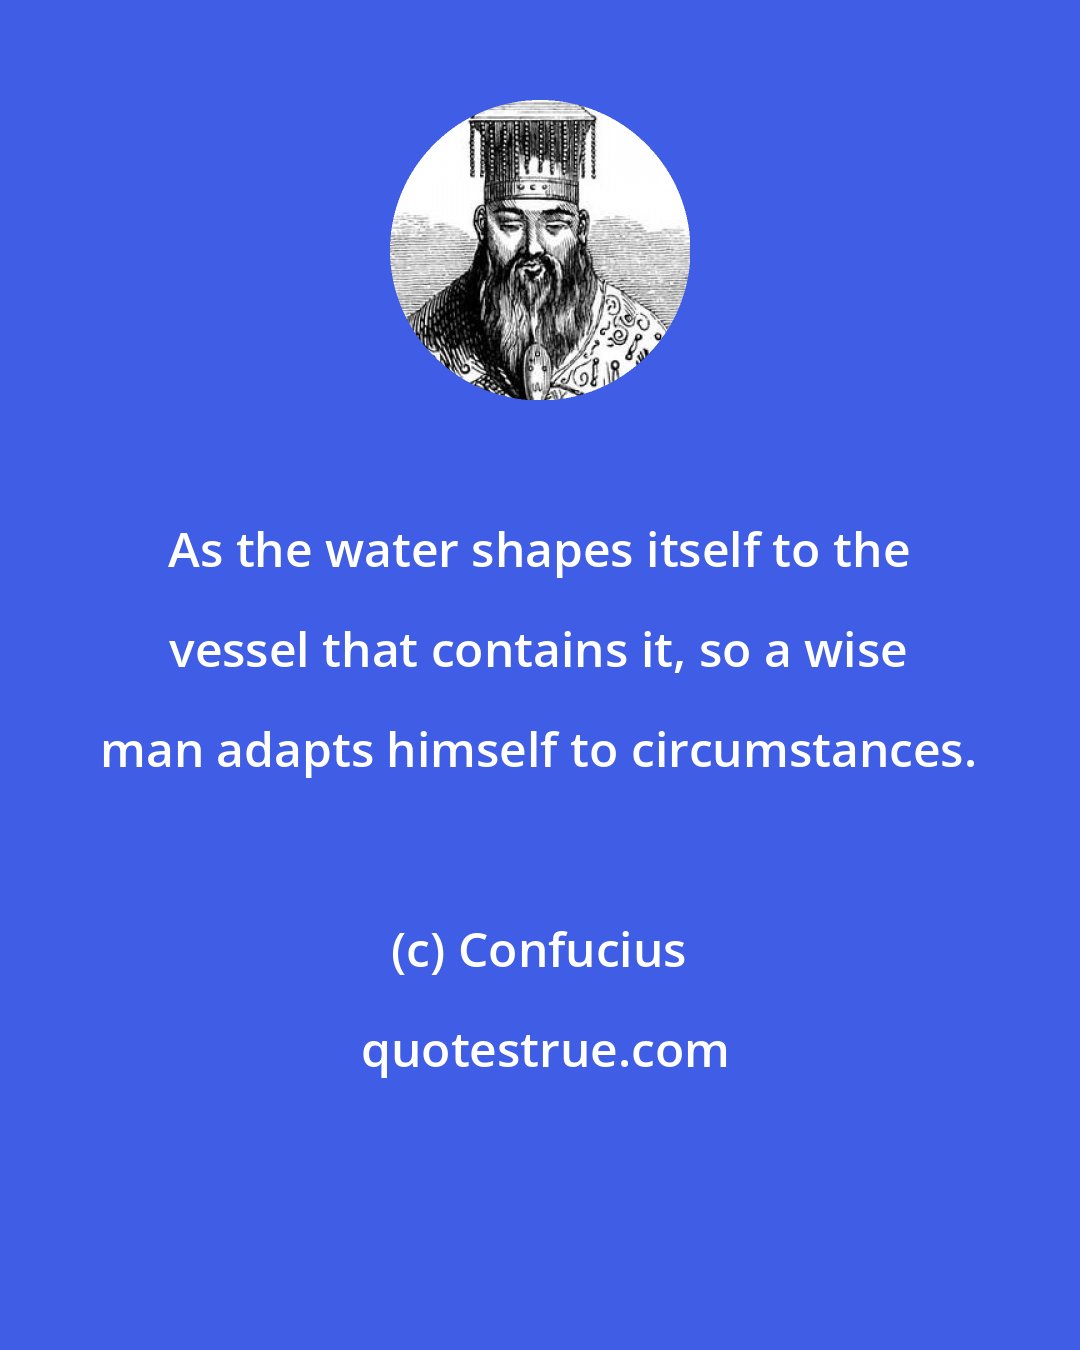 Confucius: As the water shapes itself to the vessel that contains it, so a wise man adapts himself to circumstances.